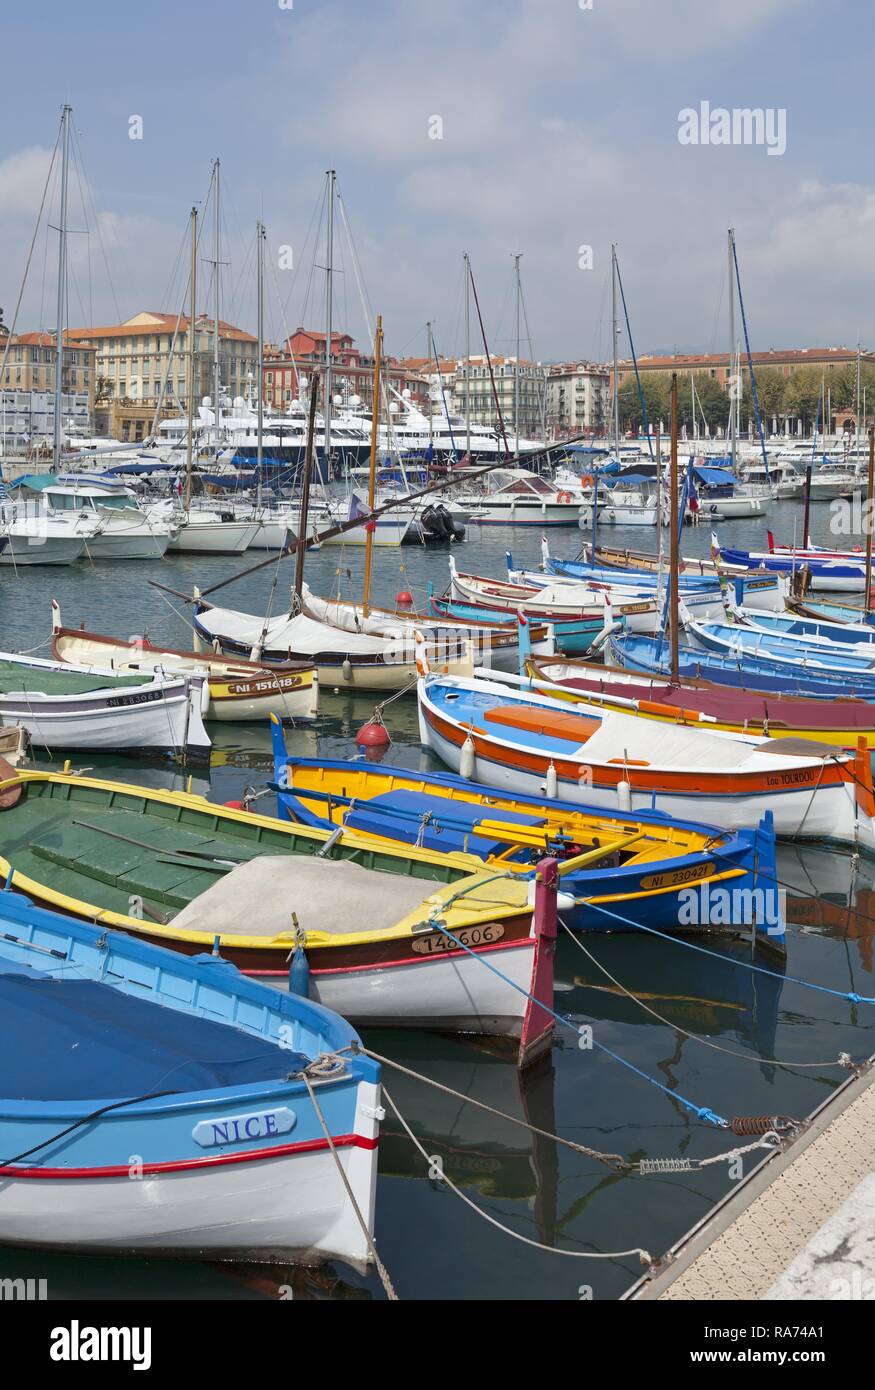 Traditional fishing boats in the marina, Nice, Département Alpes-Maritimes, Provence-Alpes-Côte d’Azur, France Stock Photo